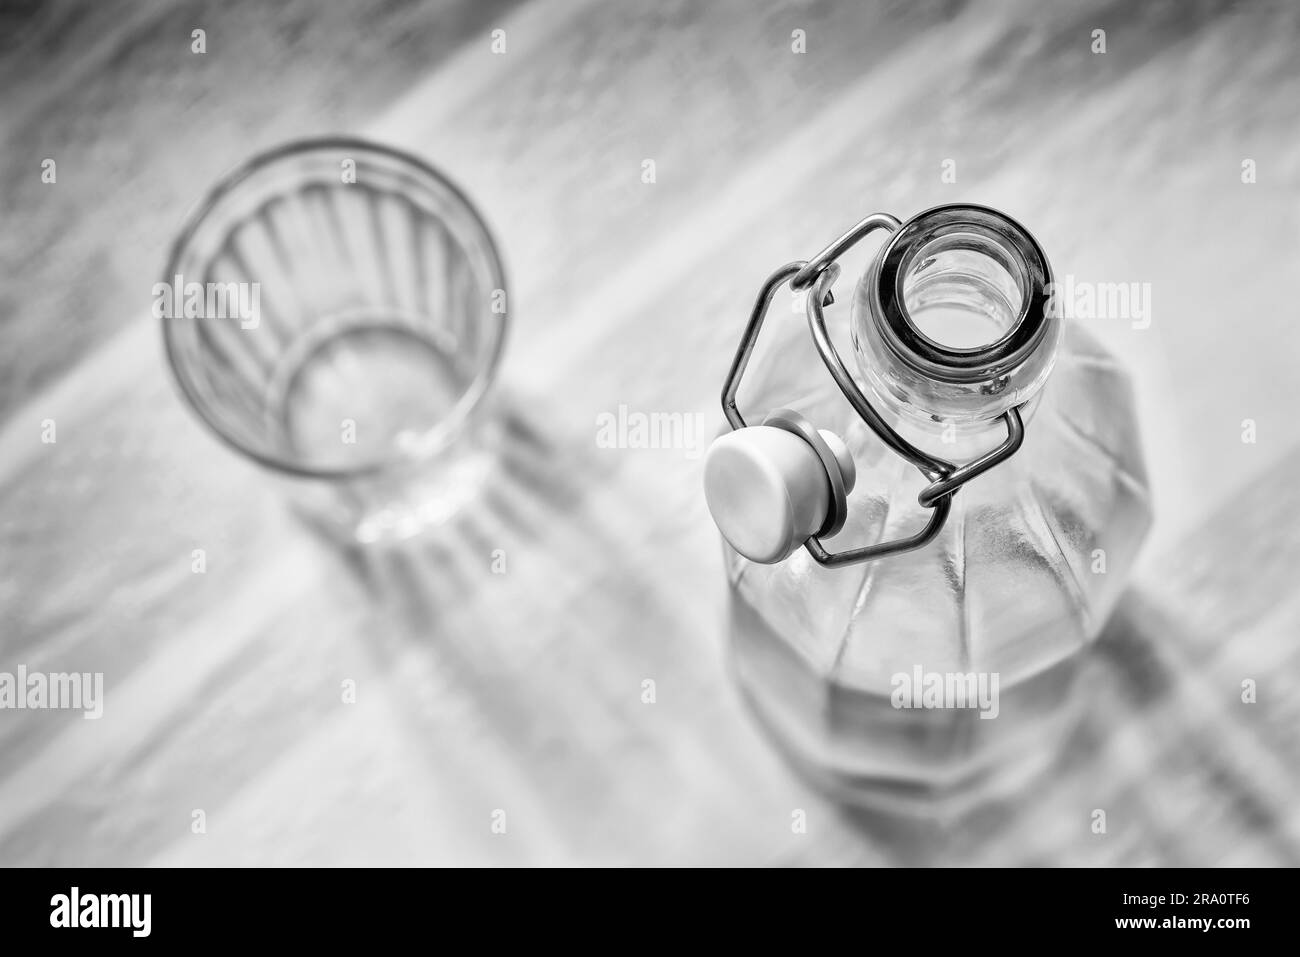 Top view of a glass bottle with a wire bail clasp ceramic stopper, and a drink glass, on a blue, pink and orange stripped tablecloth Stock Photo